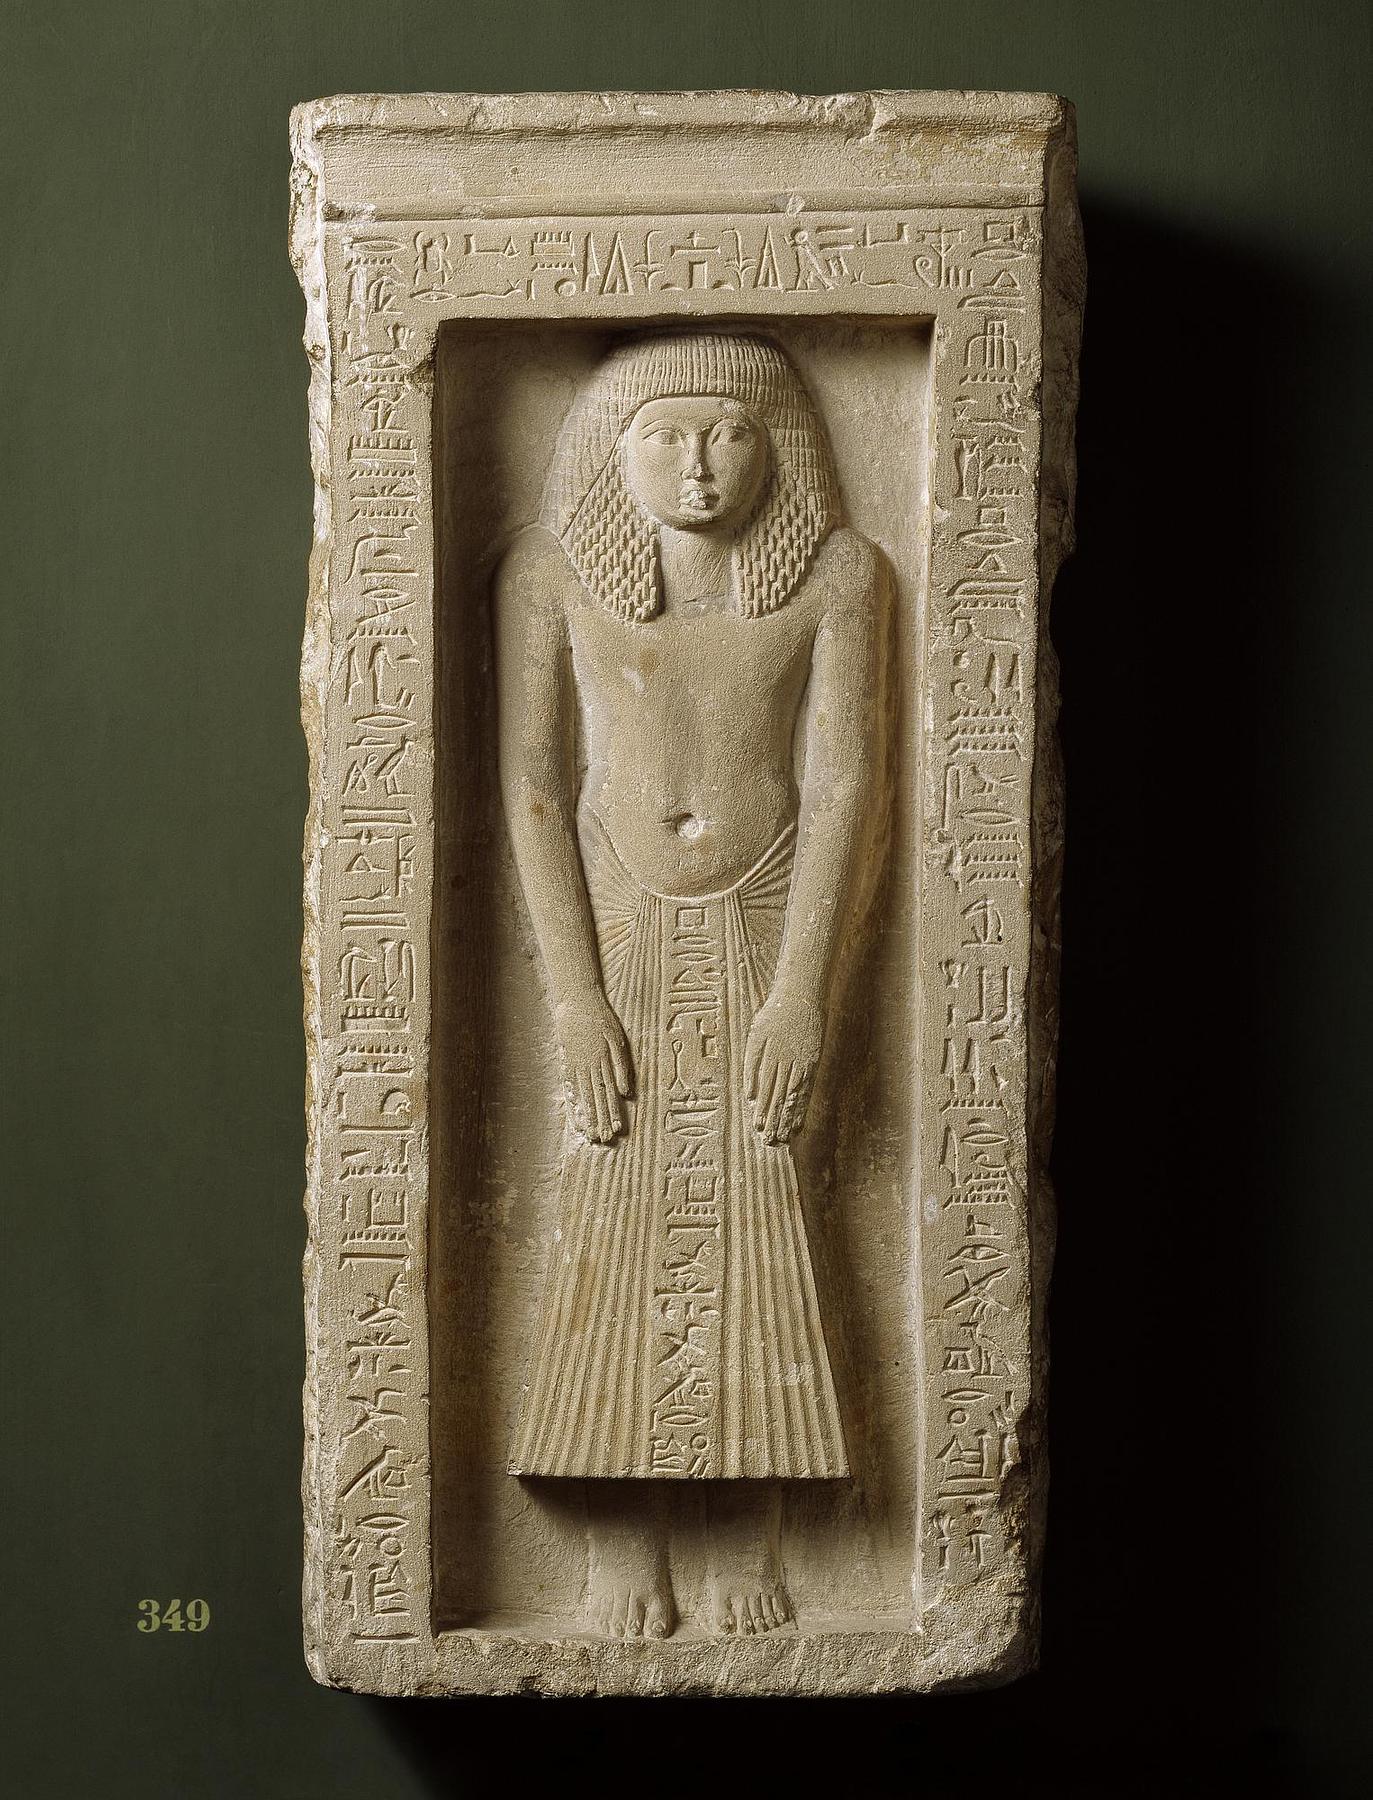 Grave stele for Pa-ger-ger in the shape of a miniature naiskos with a standing man, H349